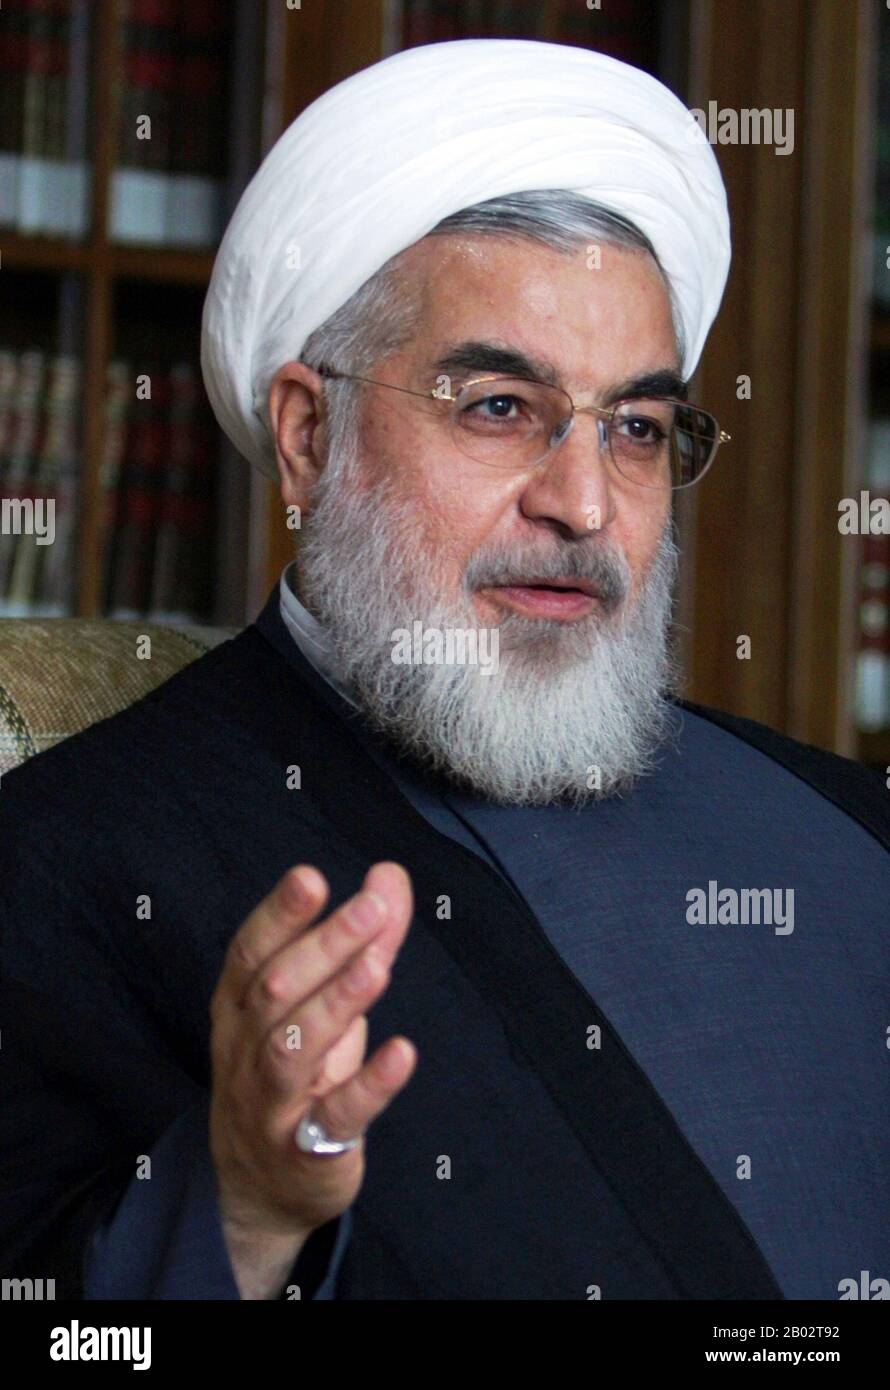 Hassan Rouhani is the seventh President of Iran, in office since 2013. He is also a former lawmaker, academic and diplomat. He has been a member of Iran's Assembly of Experts since 1999, member of the Expediency Council since 1991, and a member of the Supreme National Security Council since 1989. Stock Photo